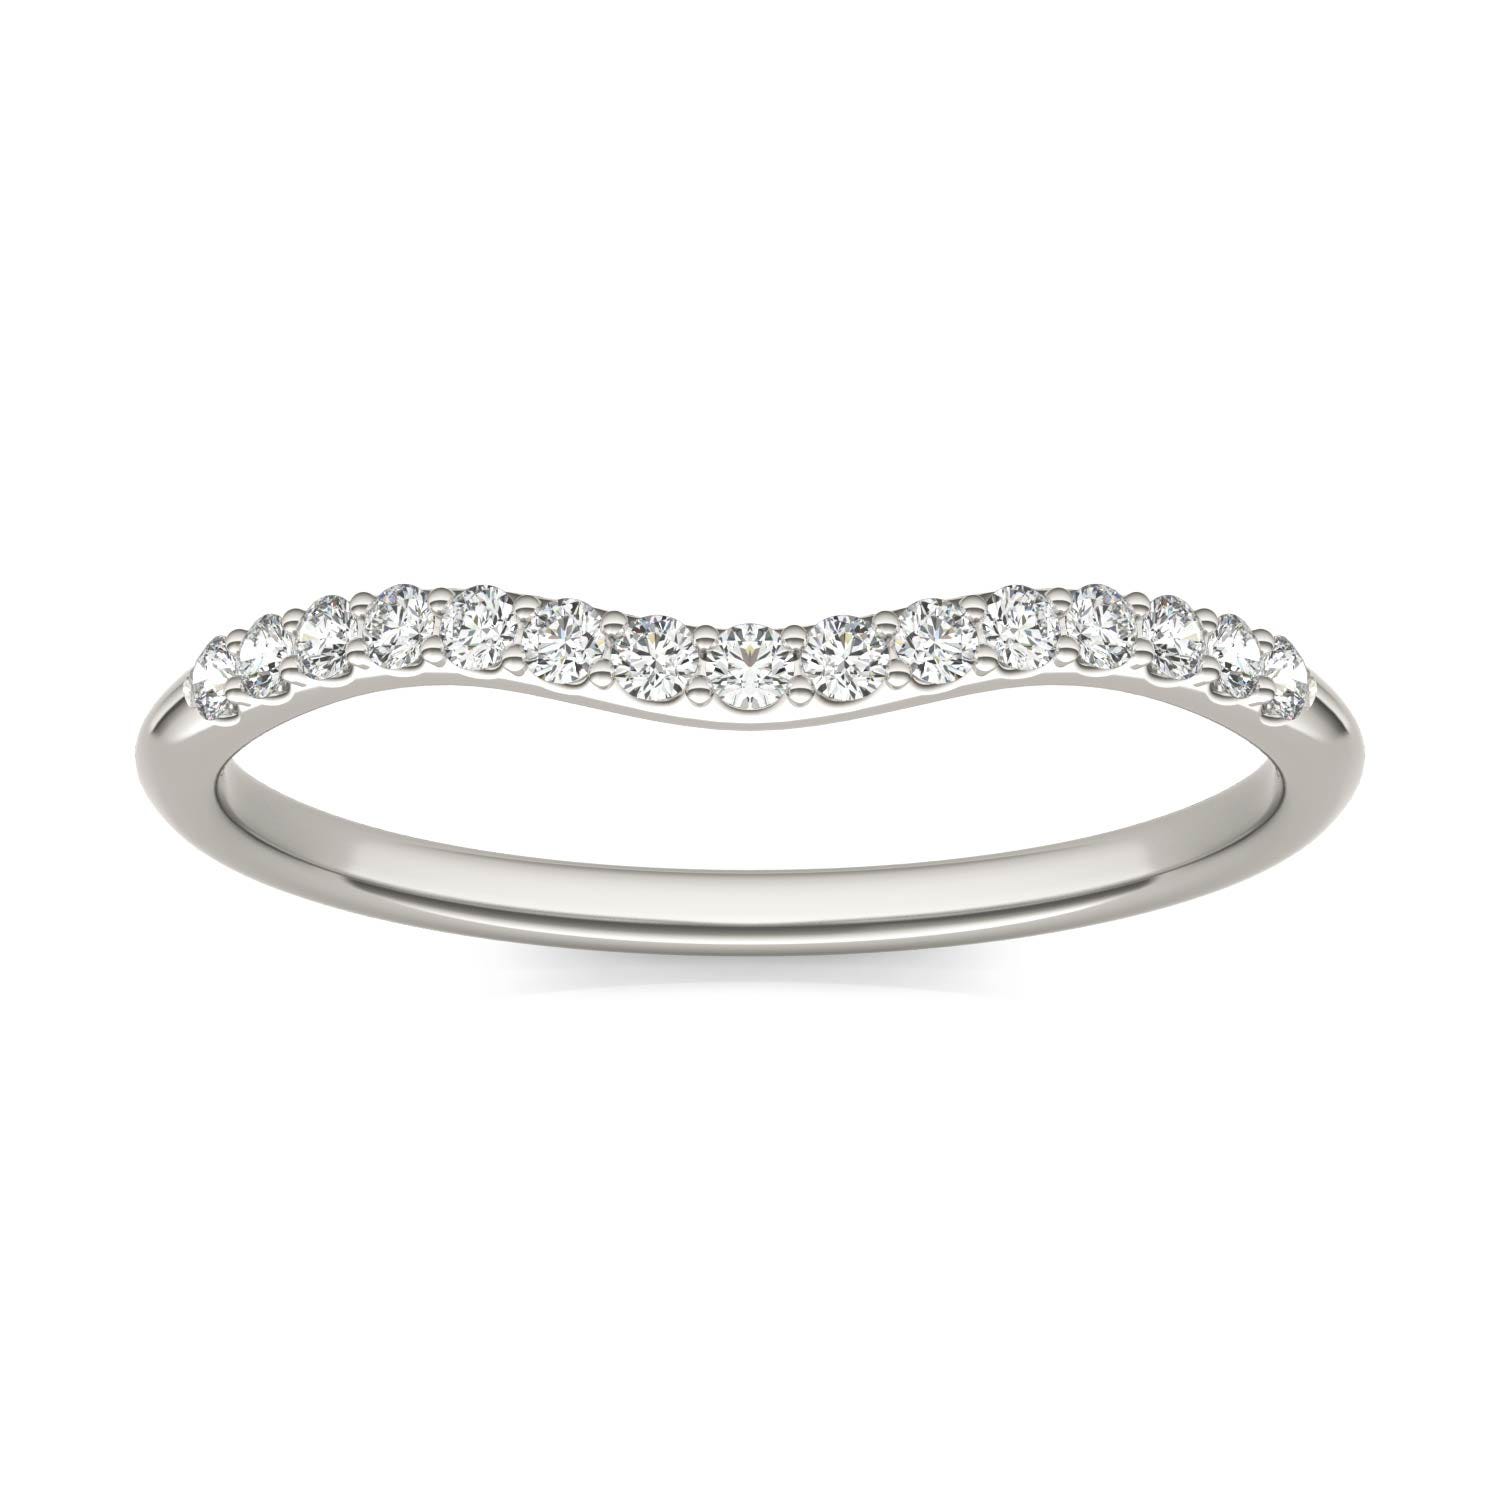 Signature 8mm Round Halo Matching Band Wedding Ring in 18K White Gold, Size: 6.5, 1/6 CTW Charles & Colvard